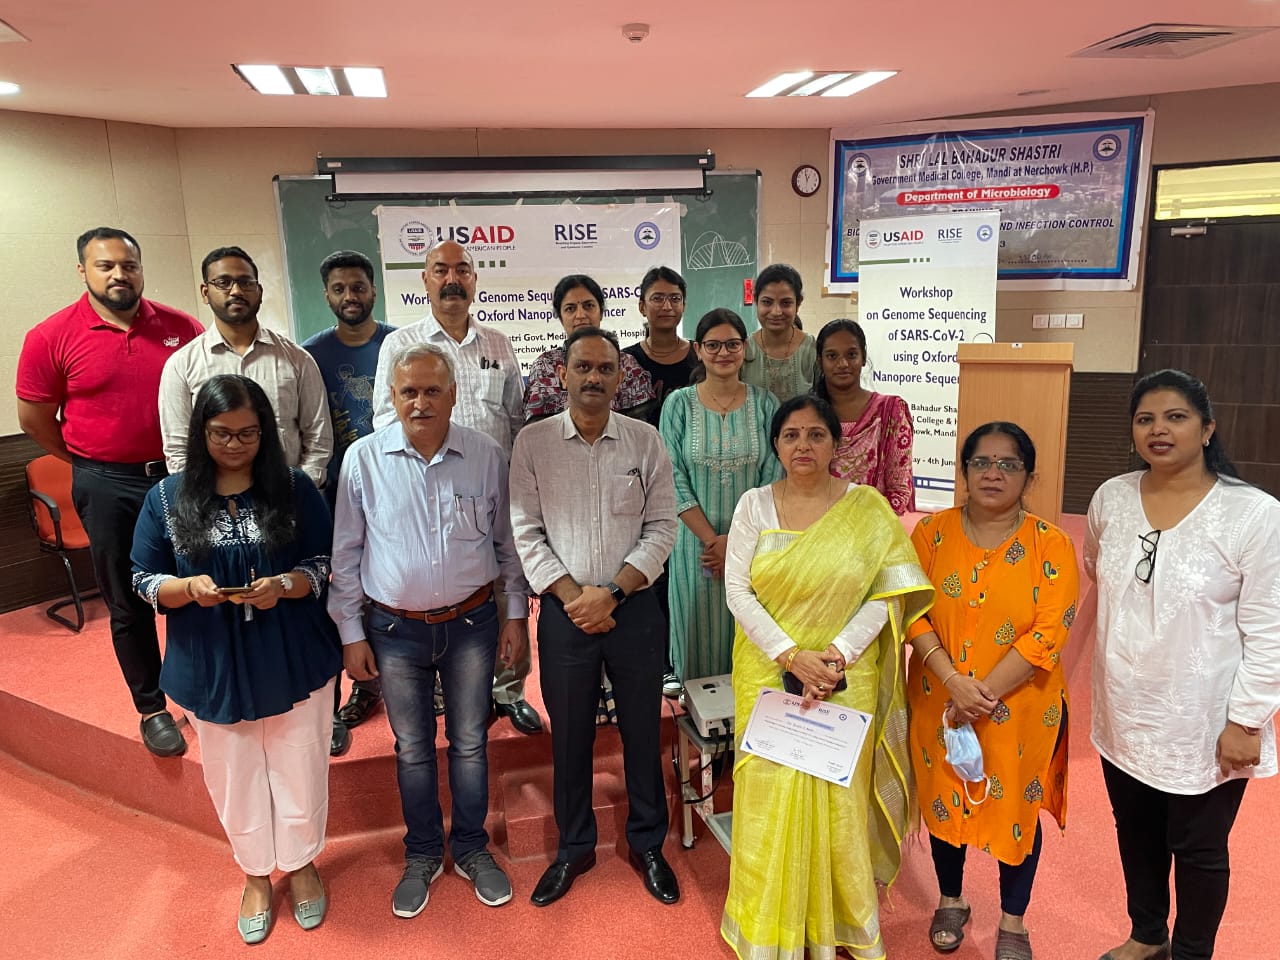 5-days Genome Sequencing Workshop at SLBS GMC&H Mandi at Ner Chowk